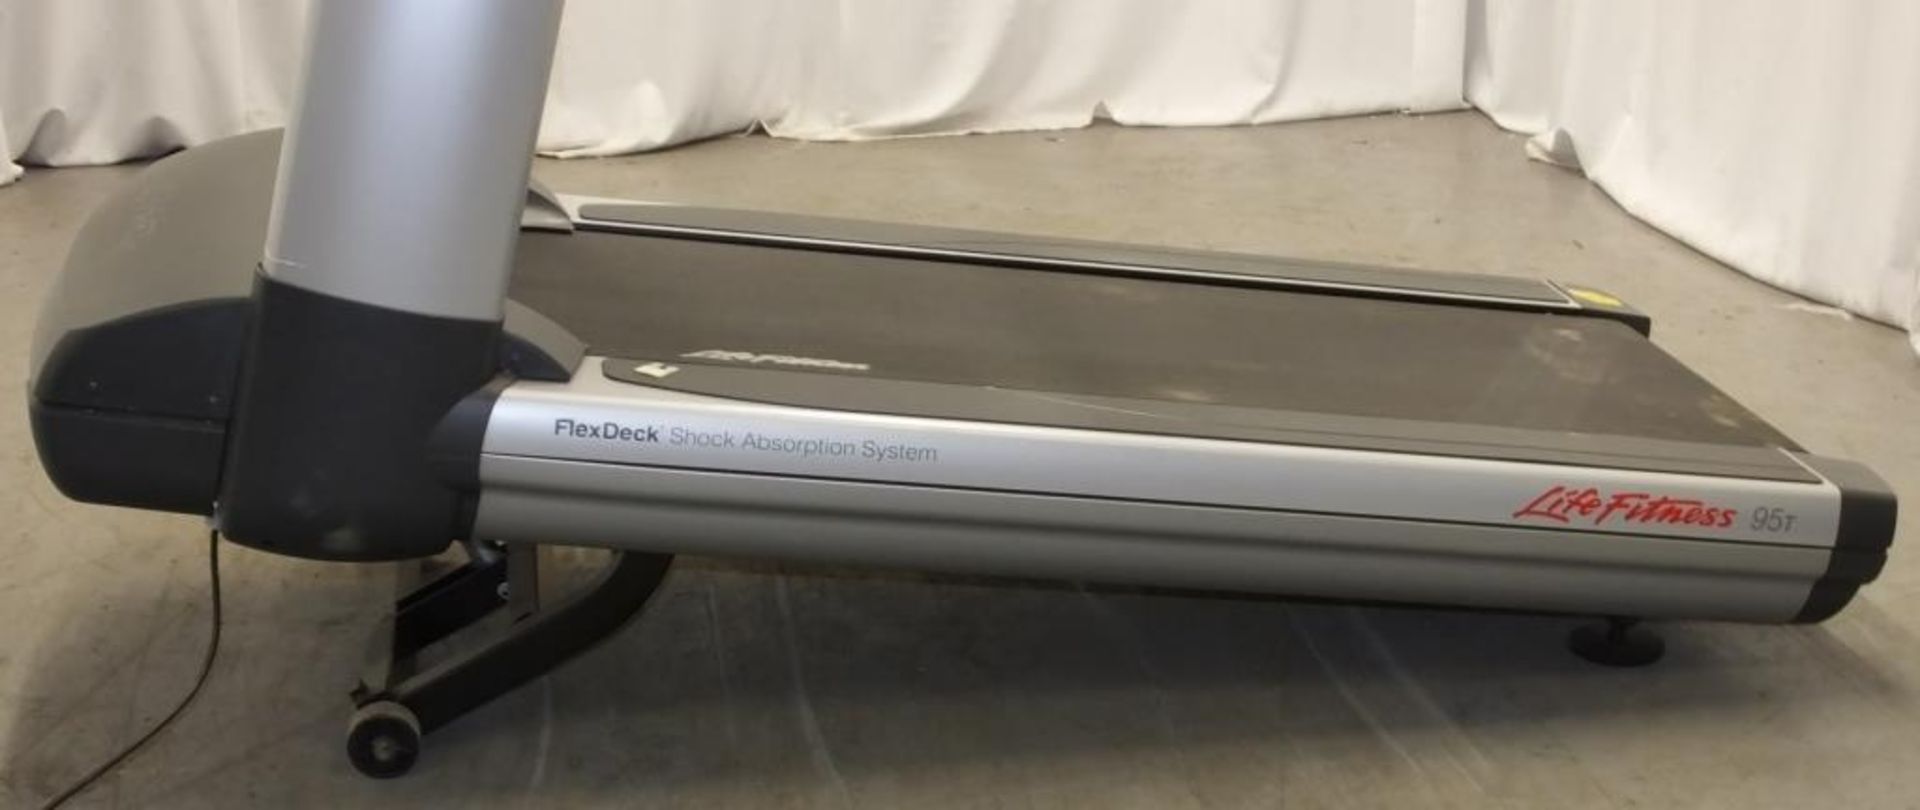 Life Fitness 95T FlexDeck shock absorption system treadmill - powers up - functionality untested - Image 14 of 14